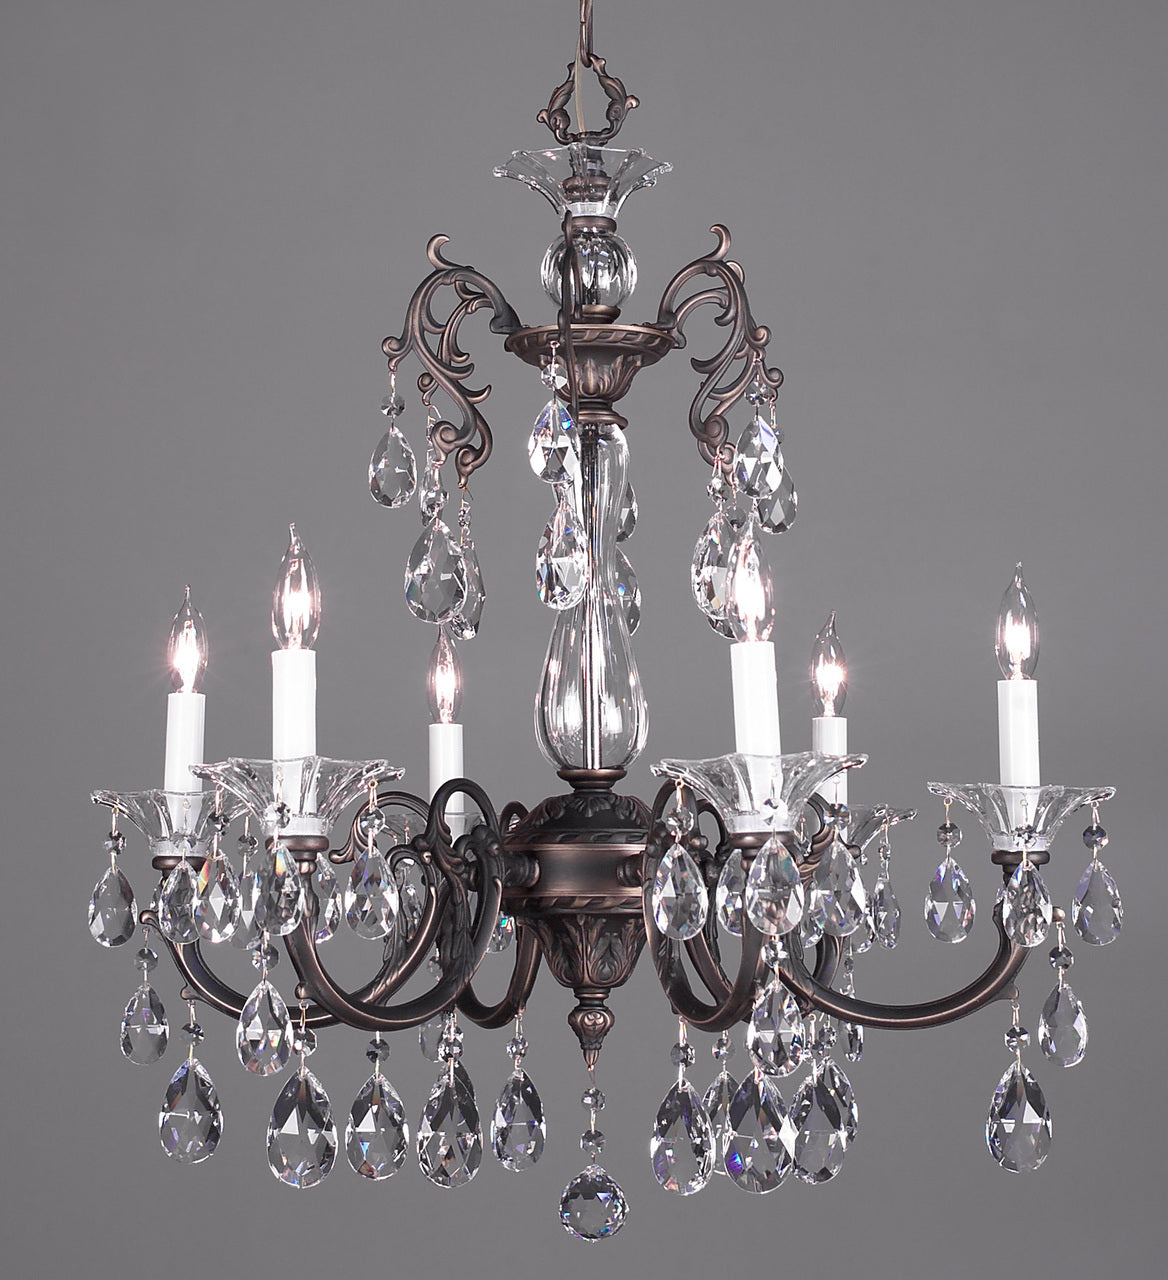 Classic Lighting 57056 RB SGT Via Lombardi Crystal Chandelier in Roman Bronze (Imported from Spain)